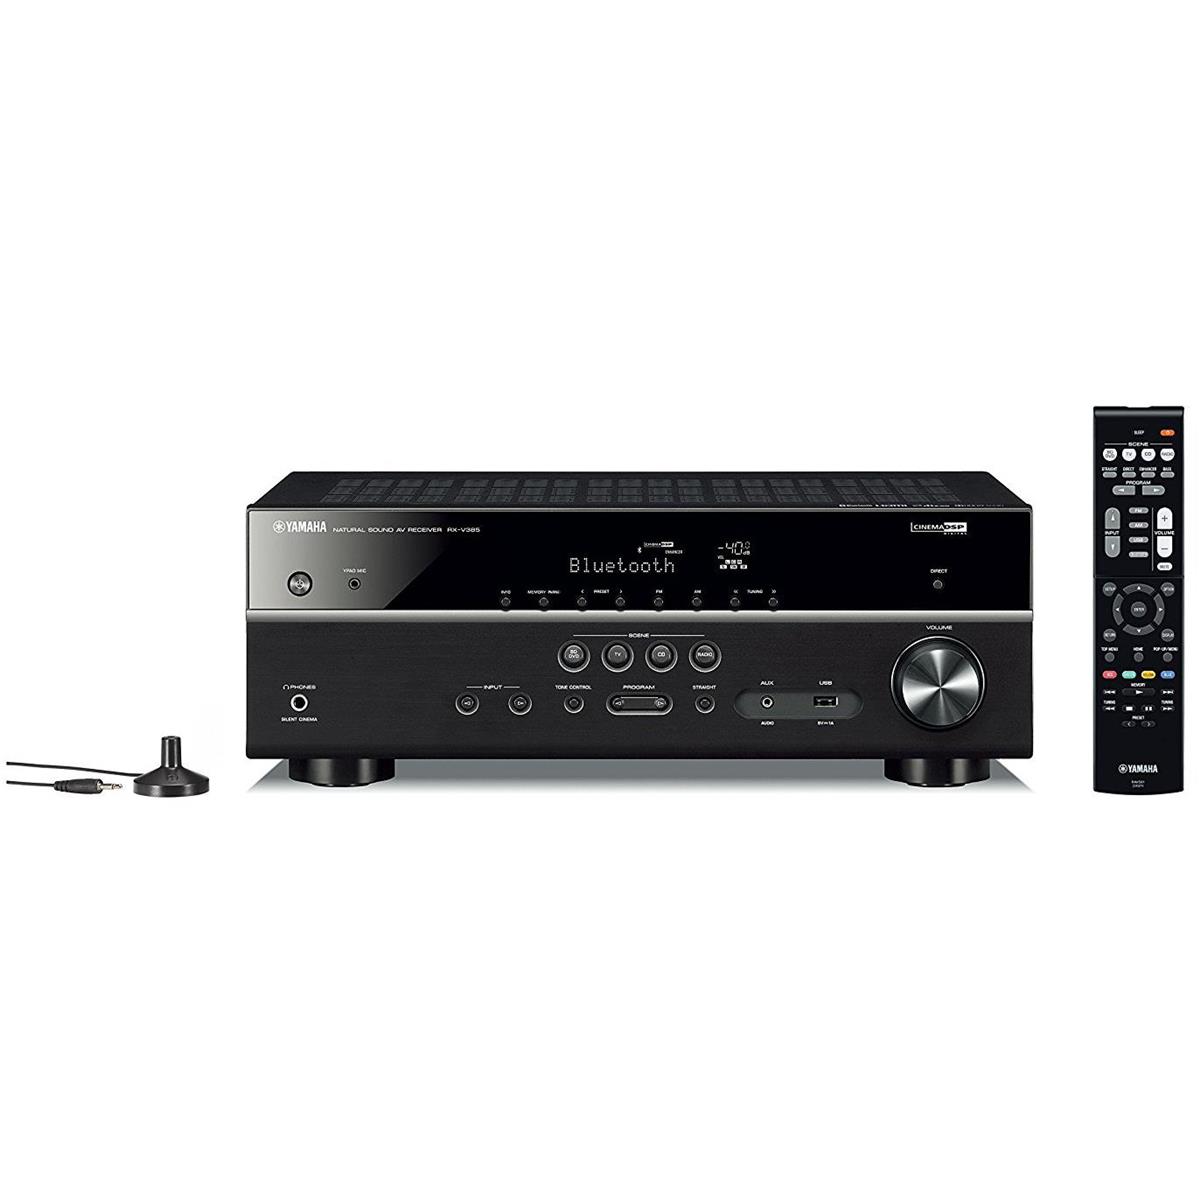 Image of Yamaha RX-V385 5.1 Channel Network AV Receiver with Bluetooth